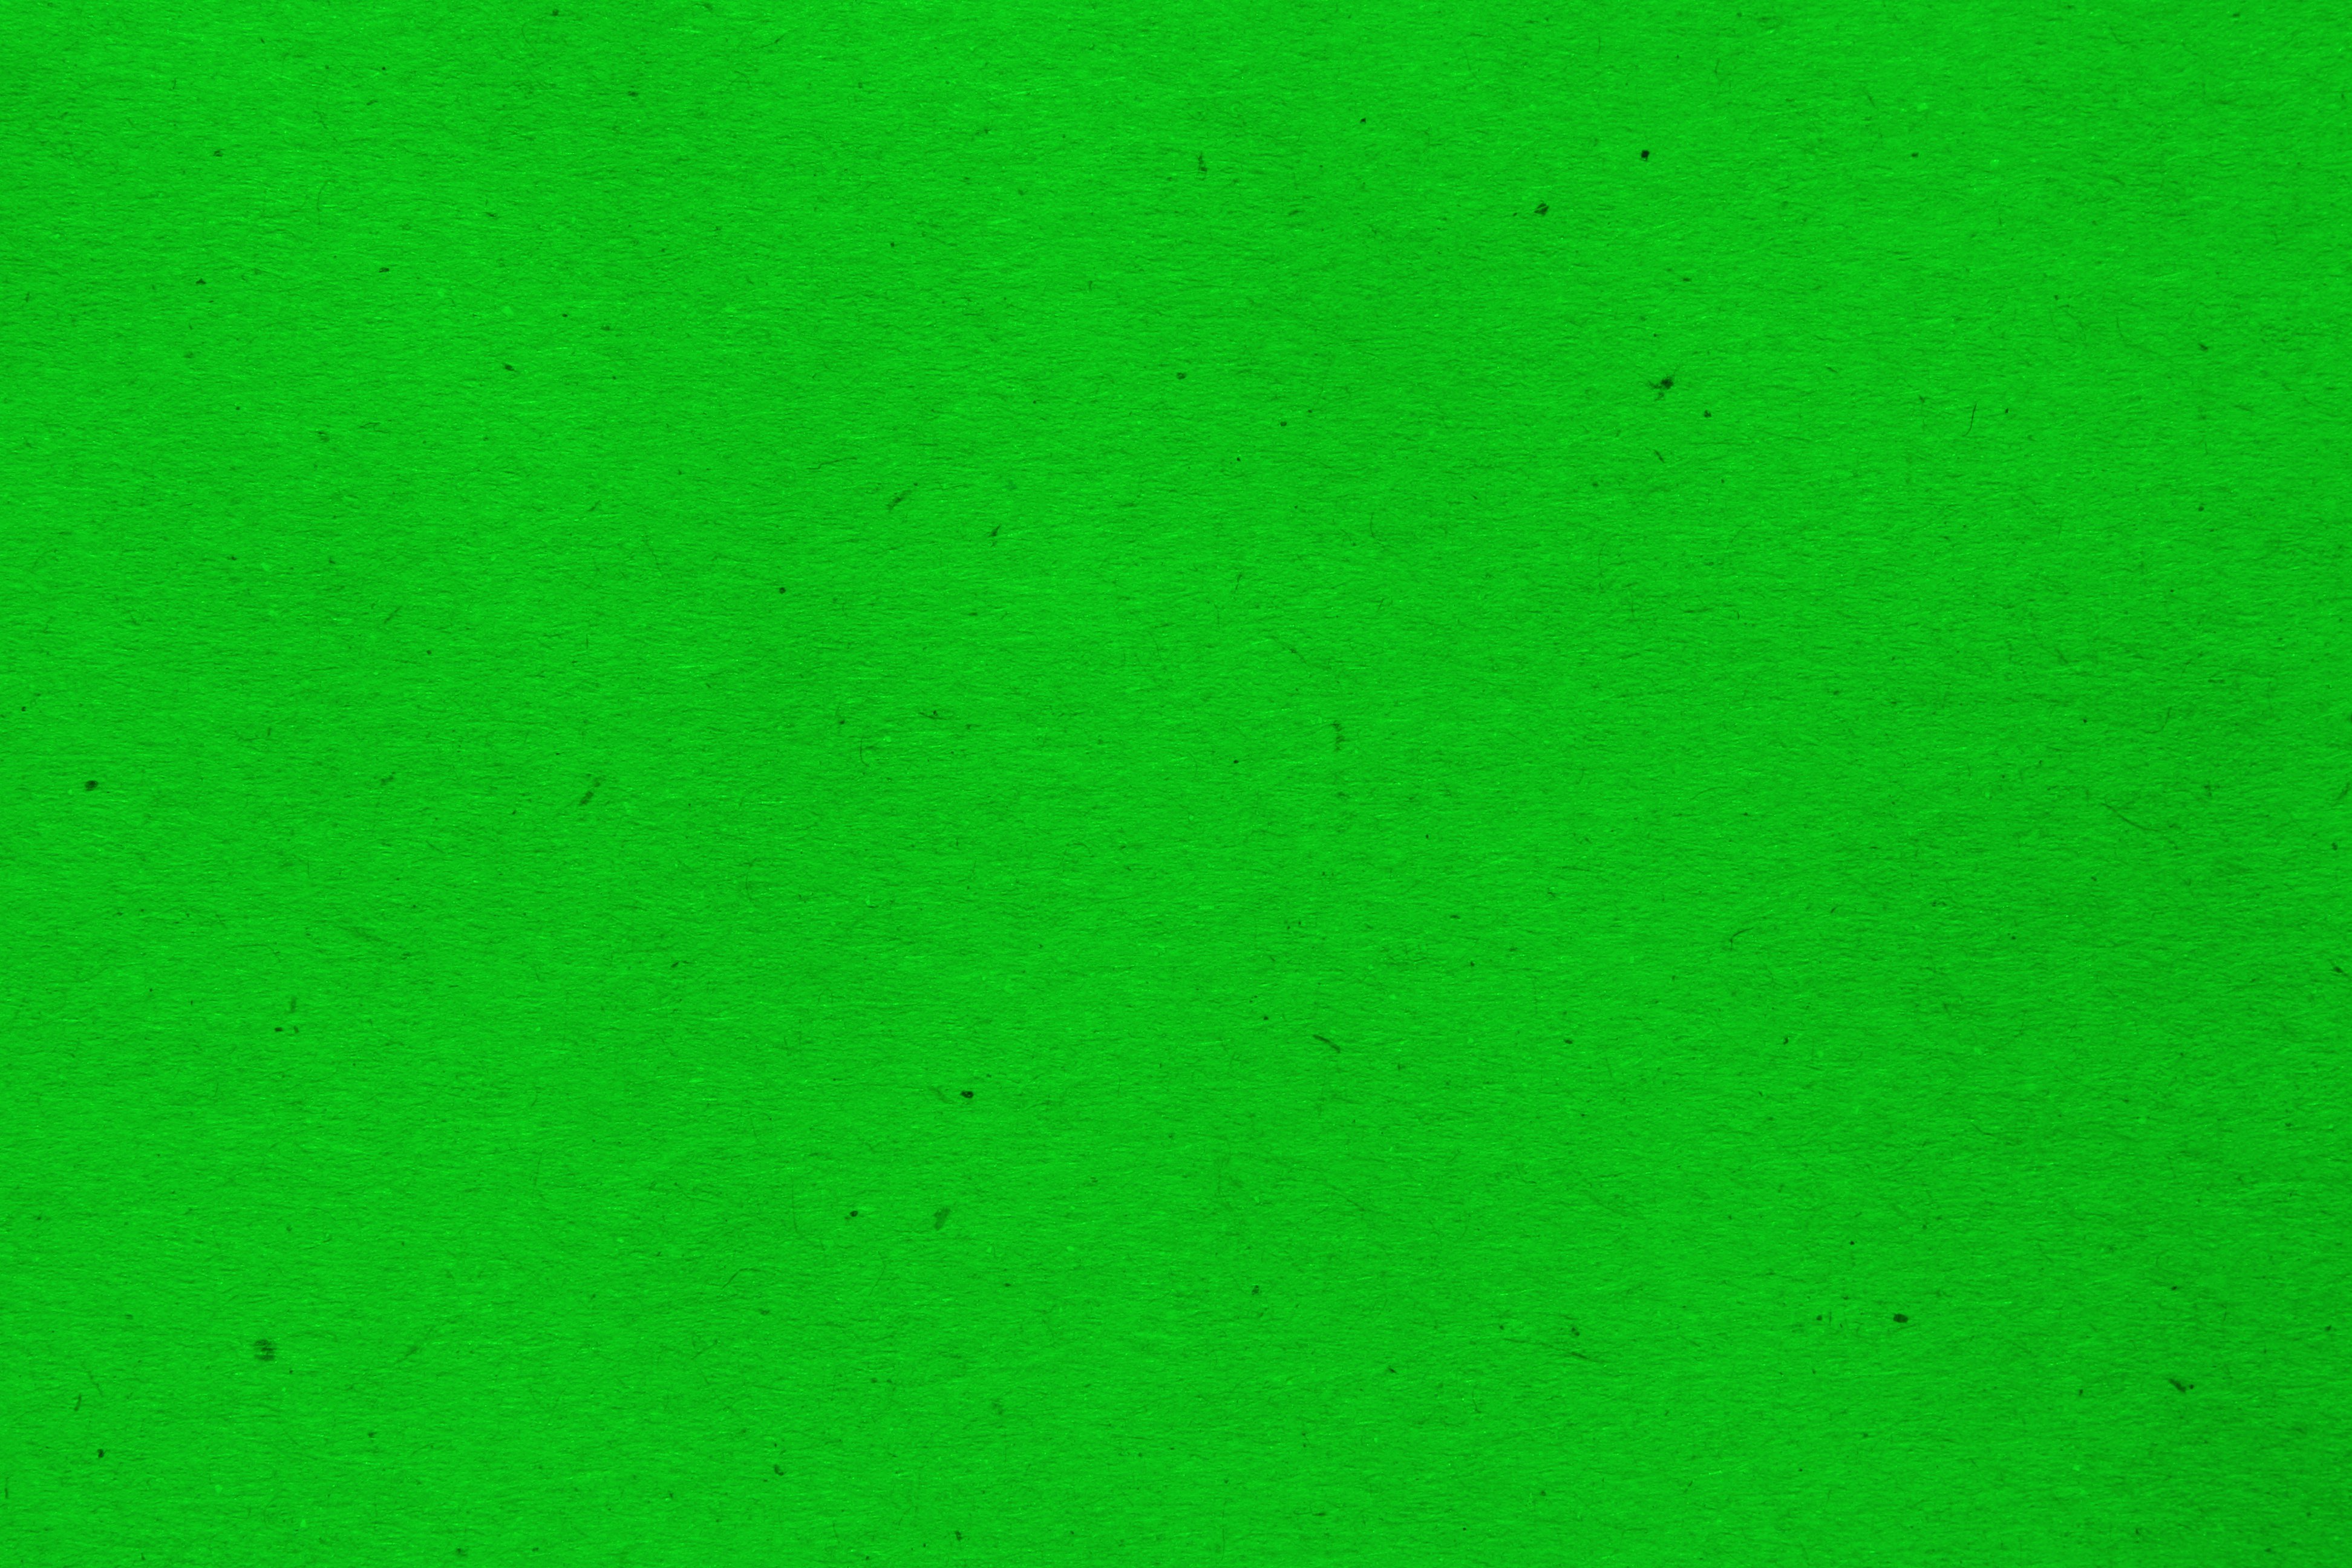 Neon Green Paper Texture with Flecks   Free High Resolution Photo